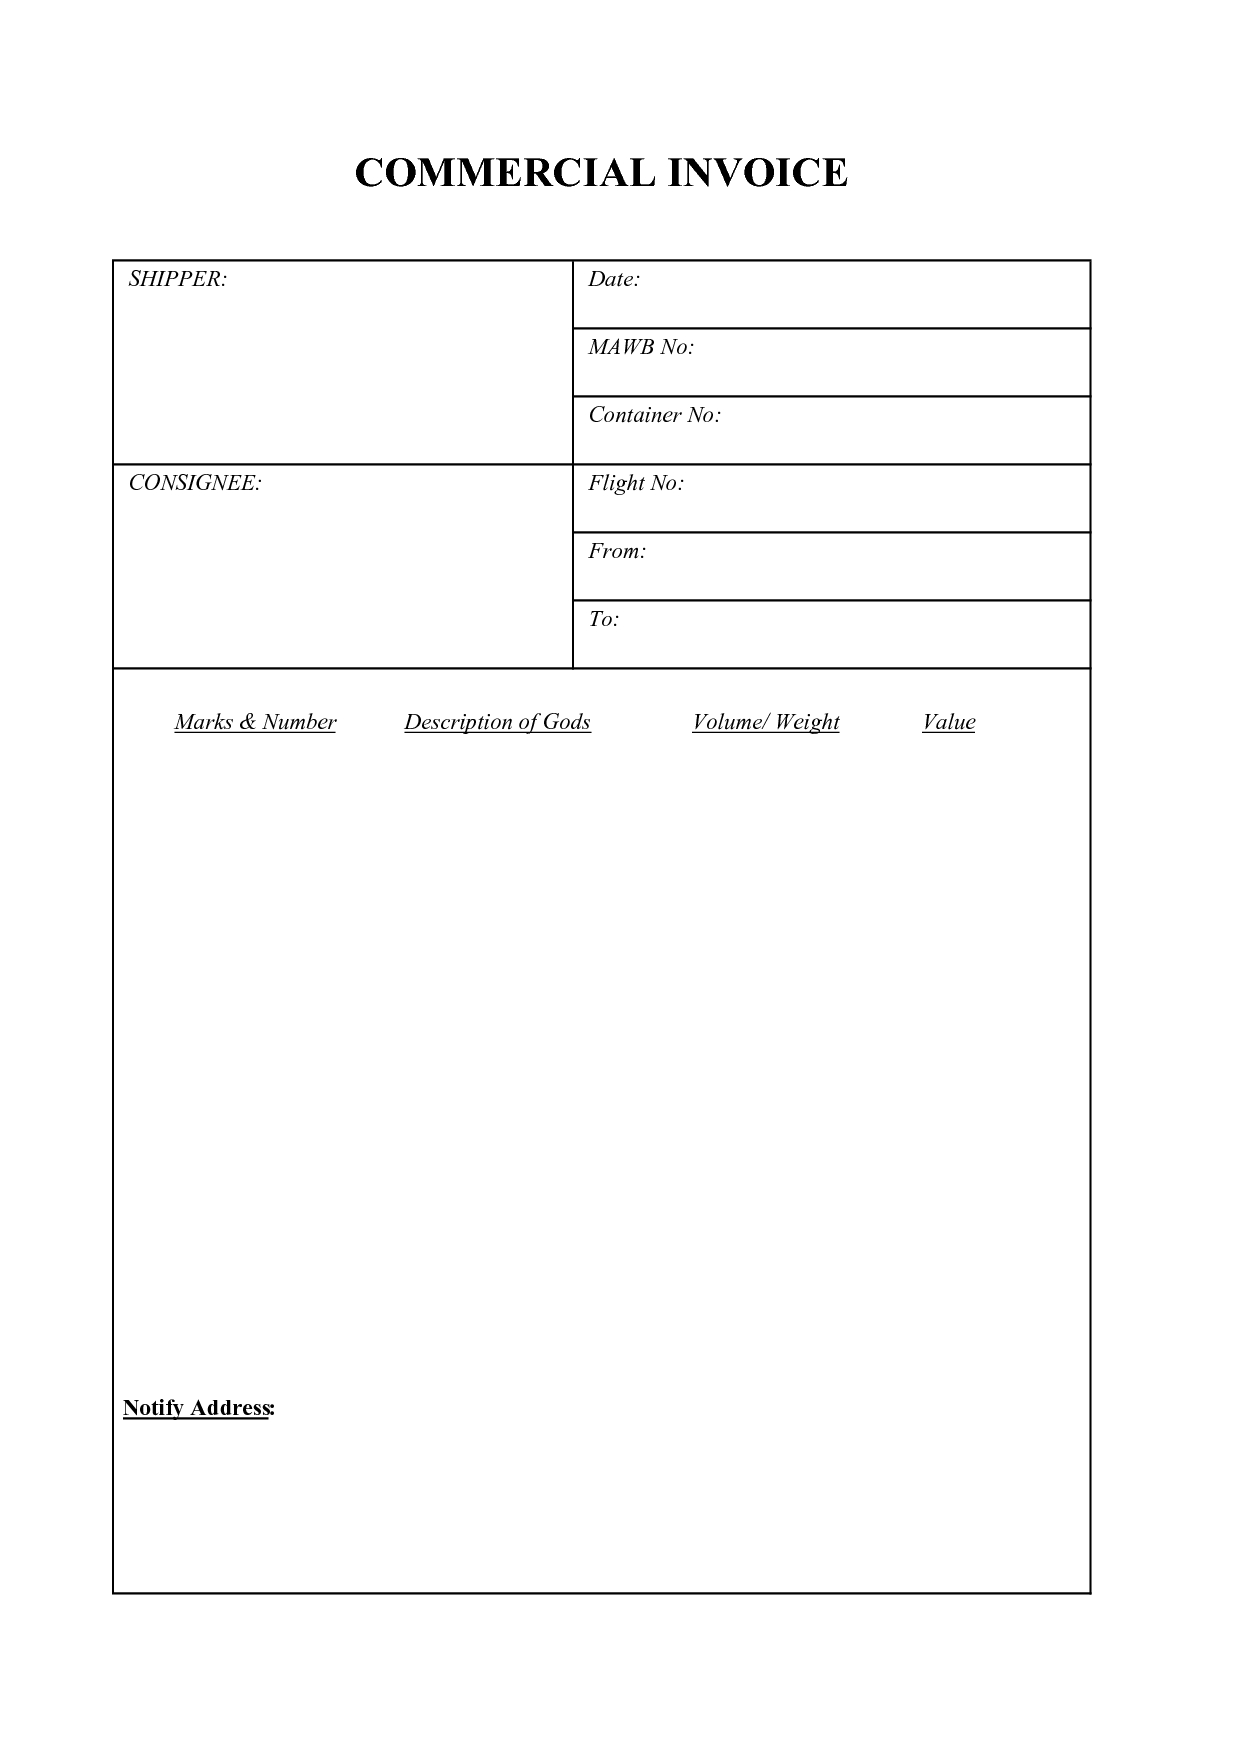 19 best photos of standard commercial invoice form blank commercial invoice template canada